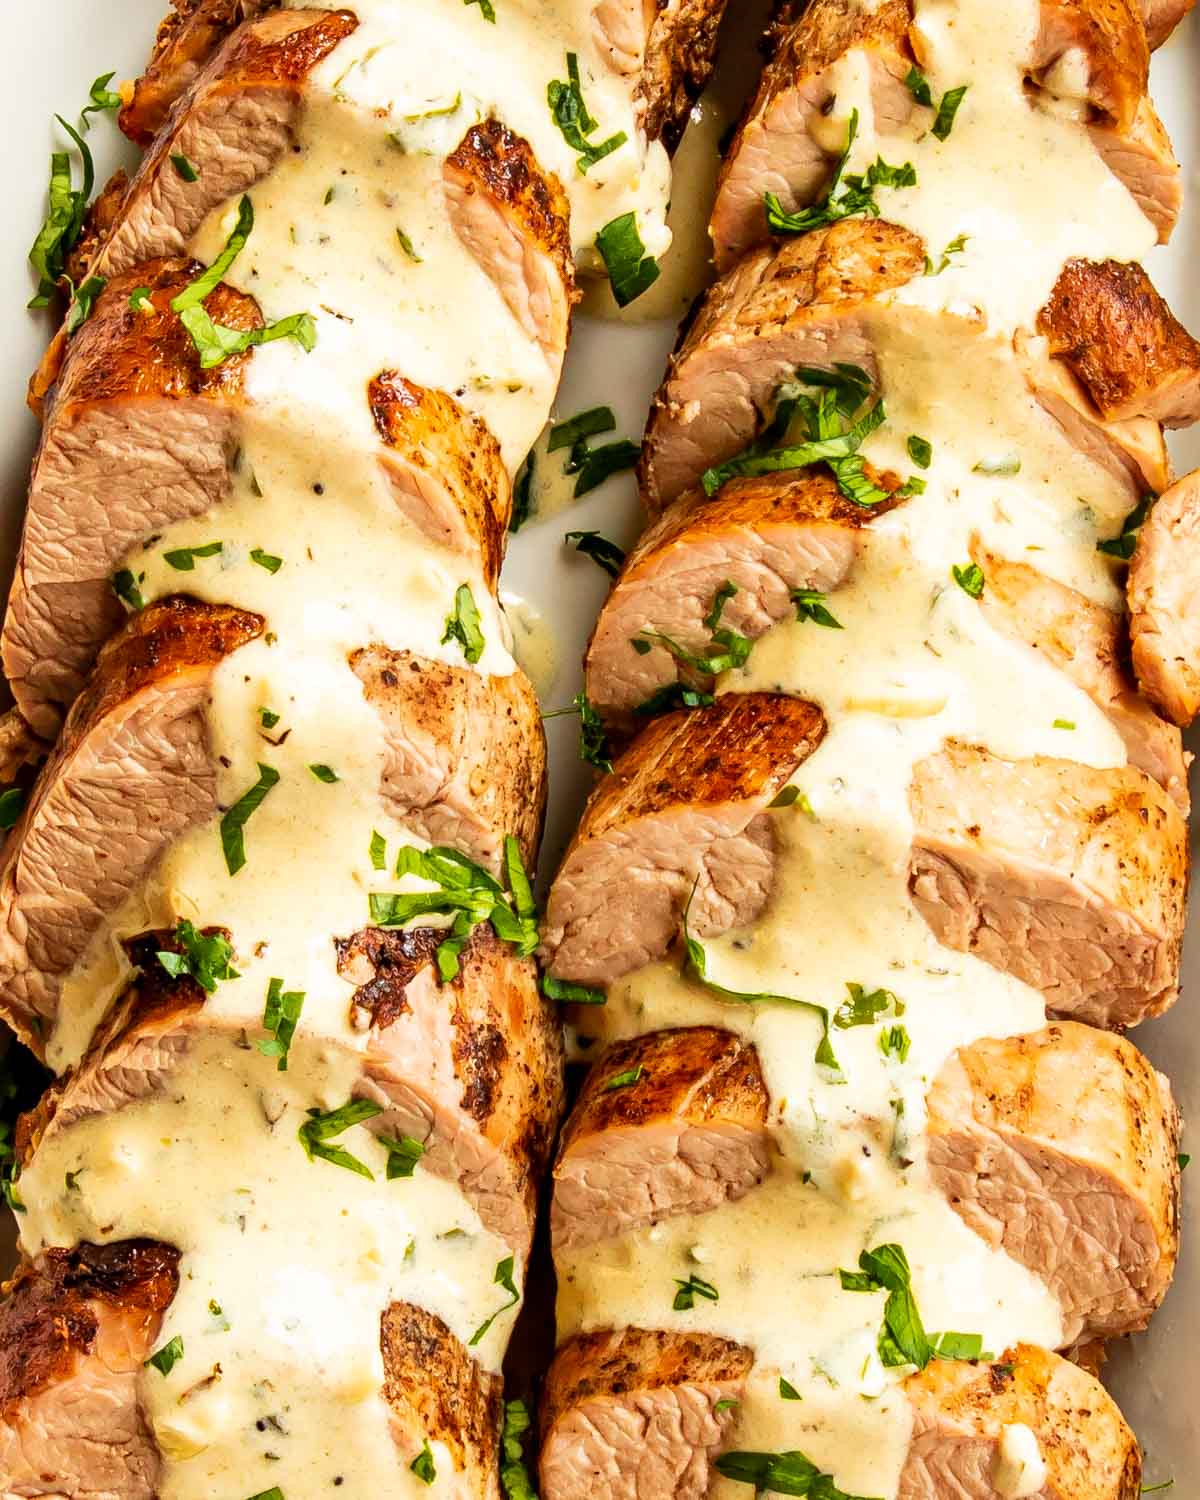 pork tenderloin sliced up with mustard sauce garnished with parsley on a white serving platter.